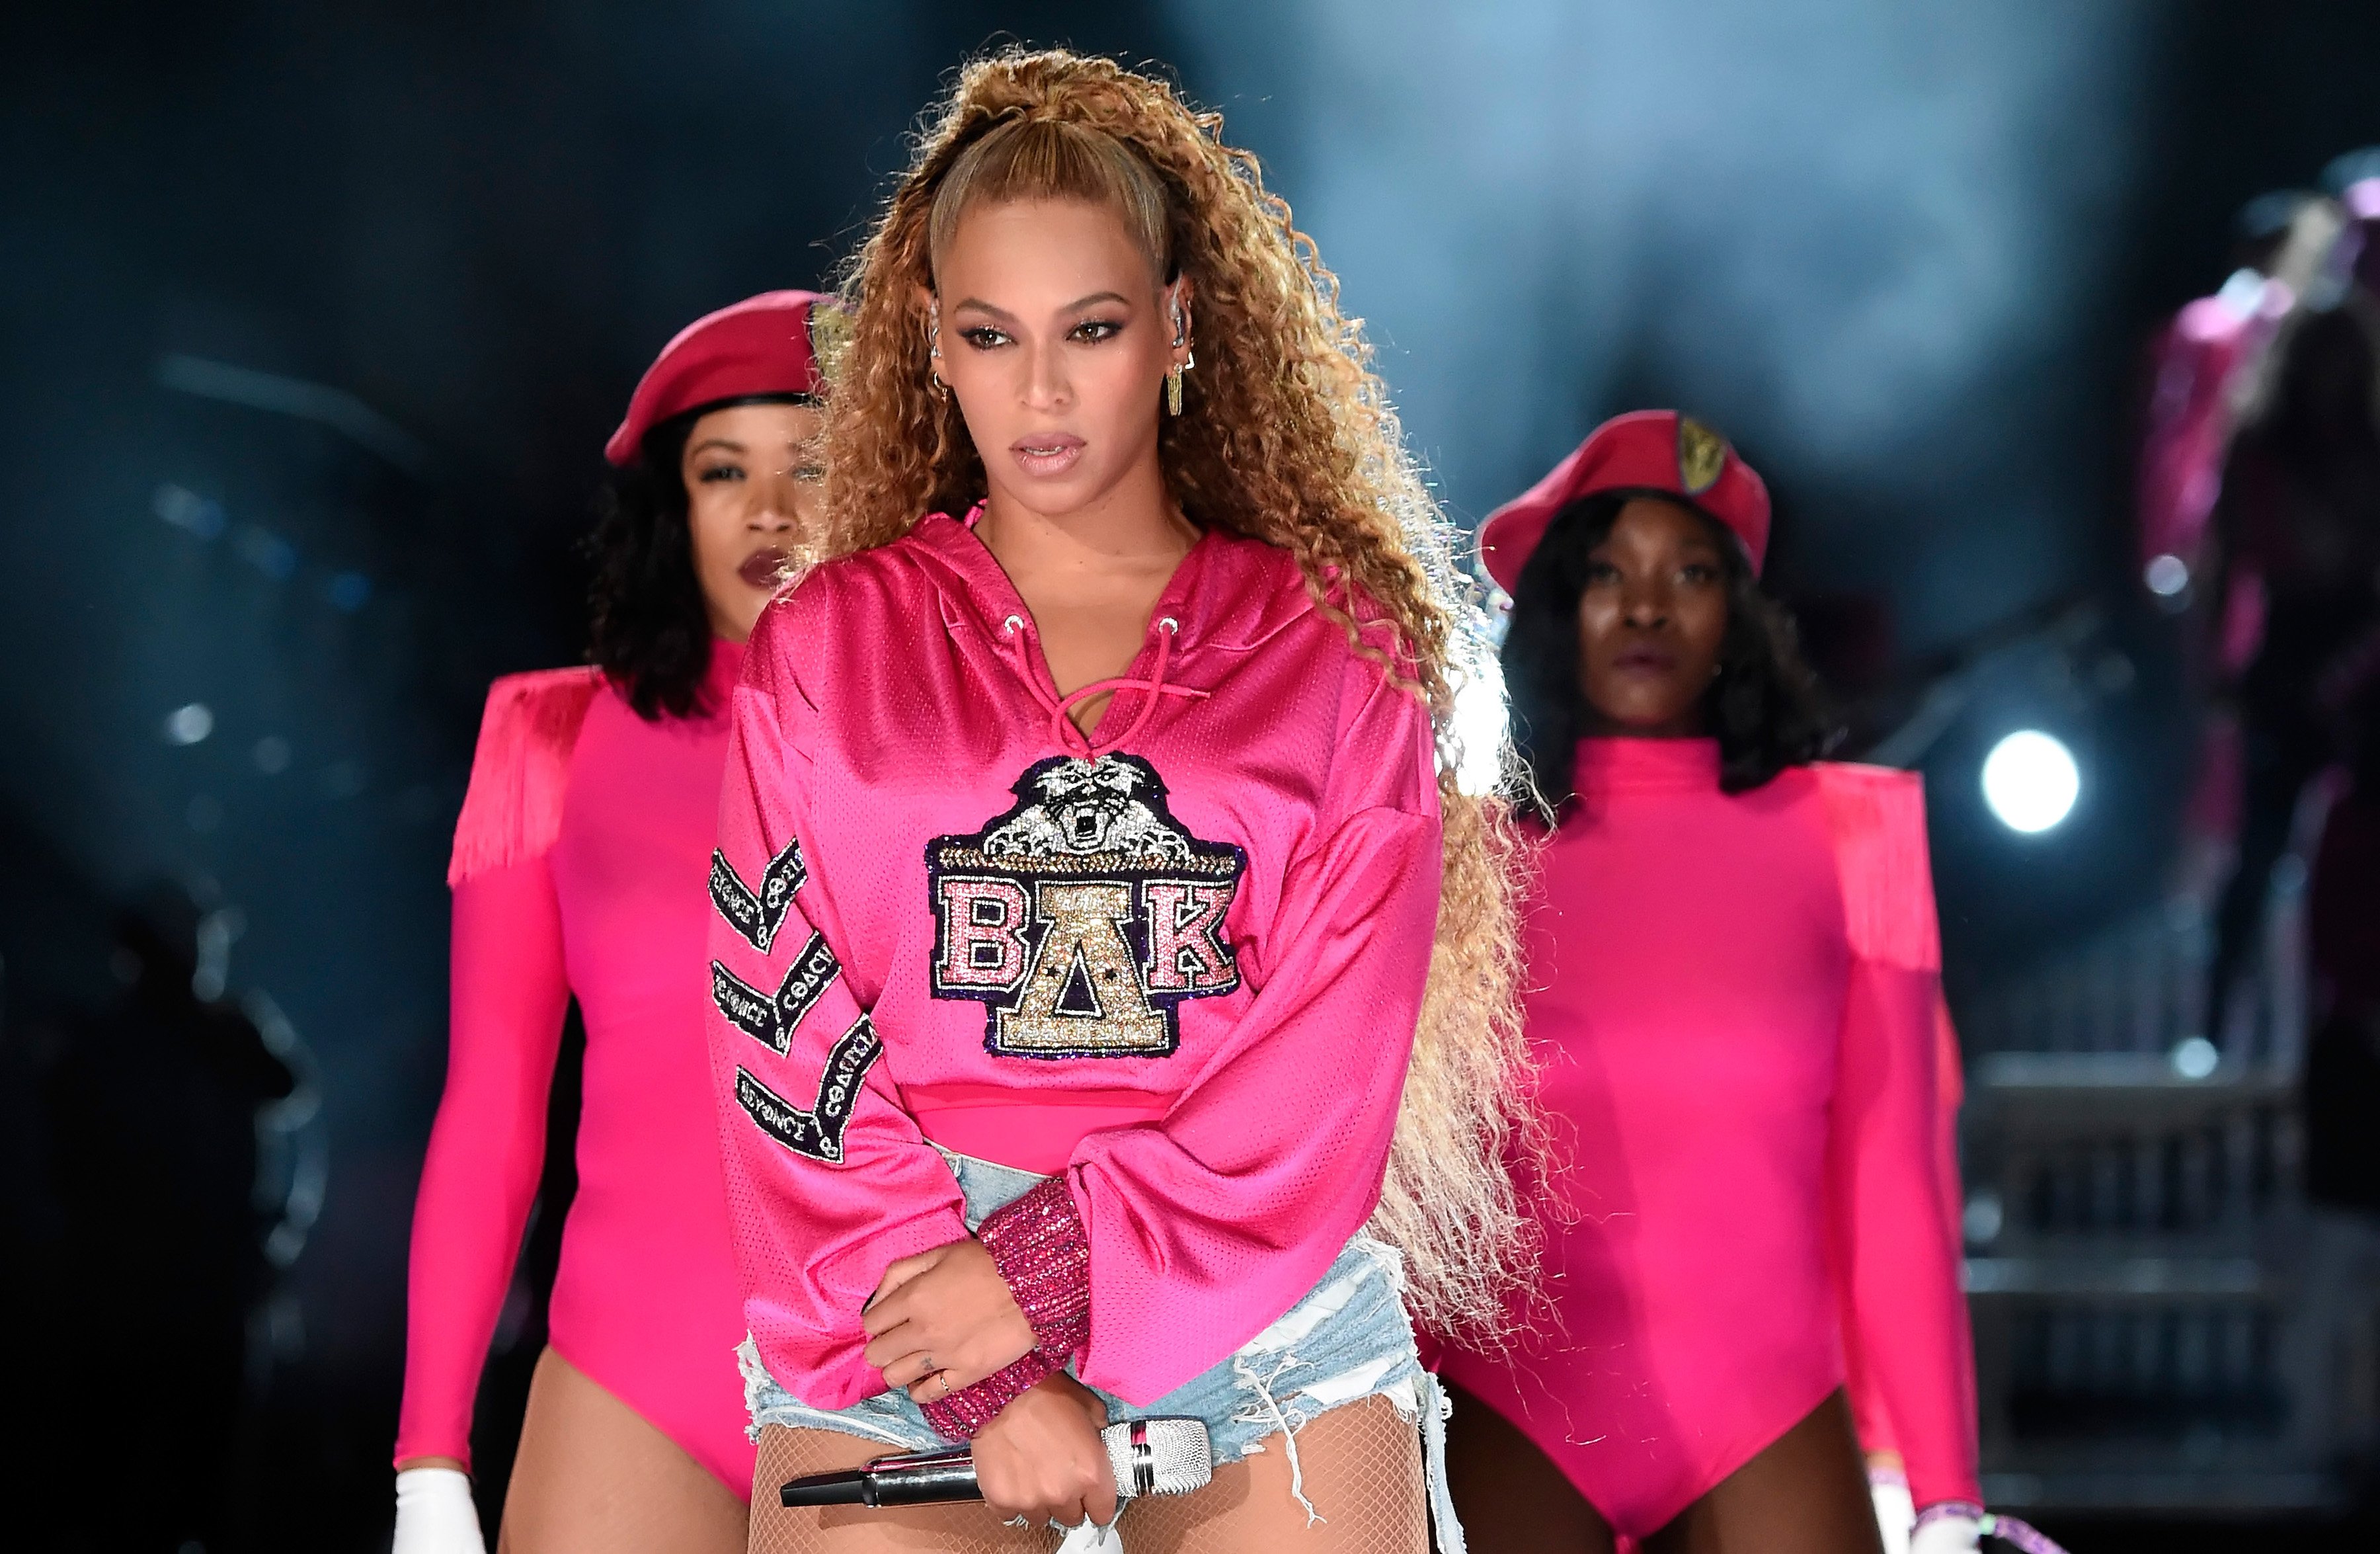 Beyoncé Photographer Explains How Her Performance Style Differs From Kanye West’s